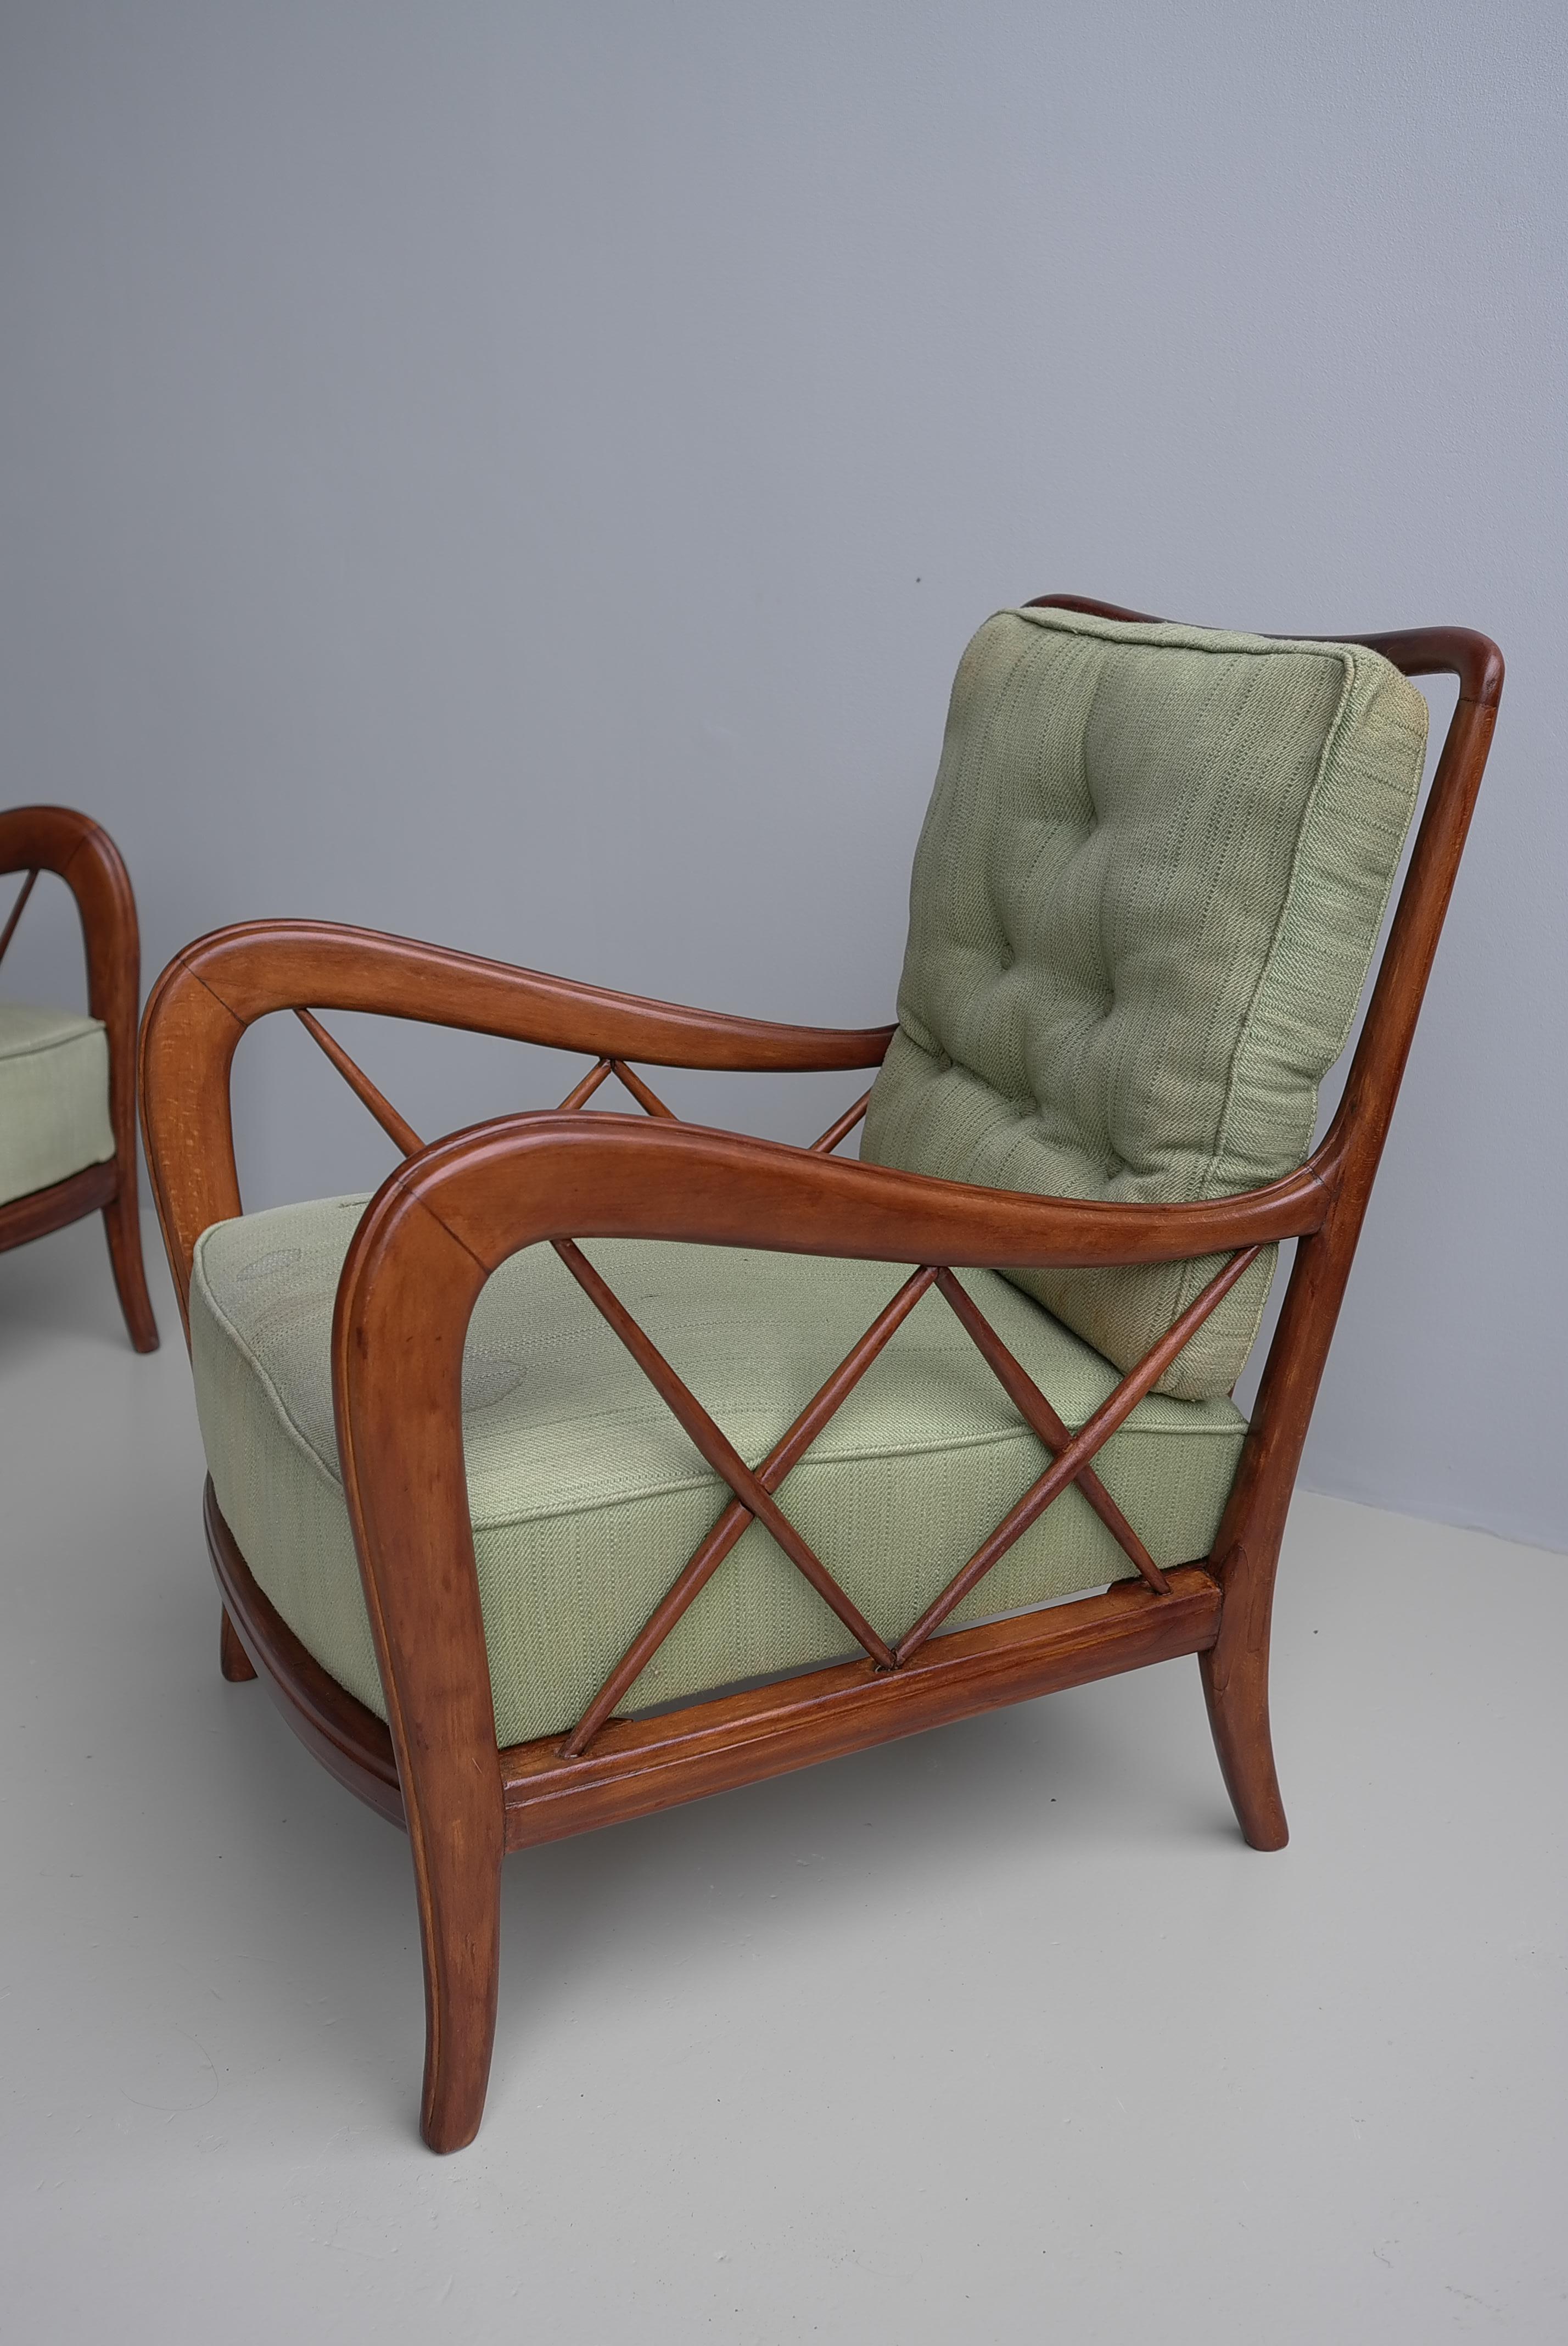 Walnut Wooden Lounge Chairs attr Paolo Buffa, Milan Italy 1940's For Sale 6